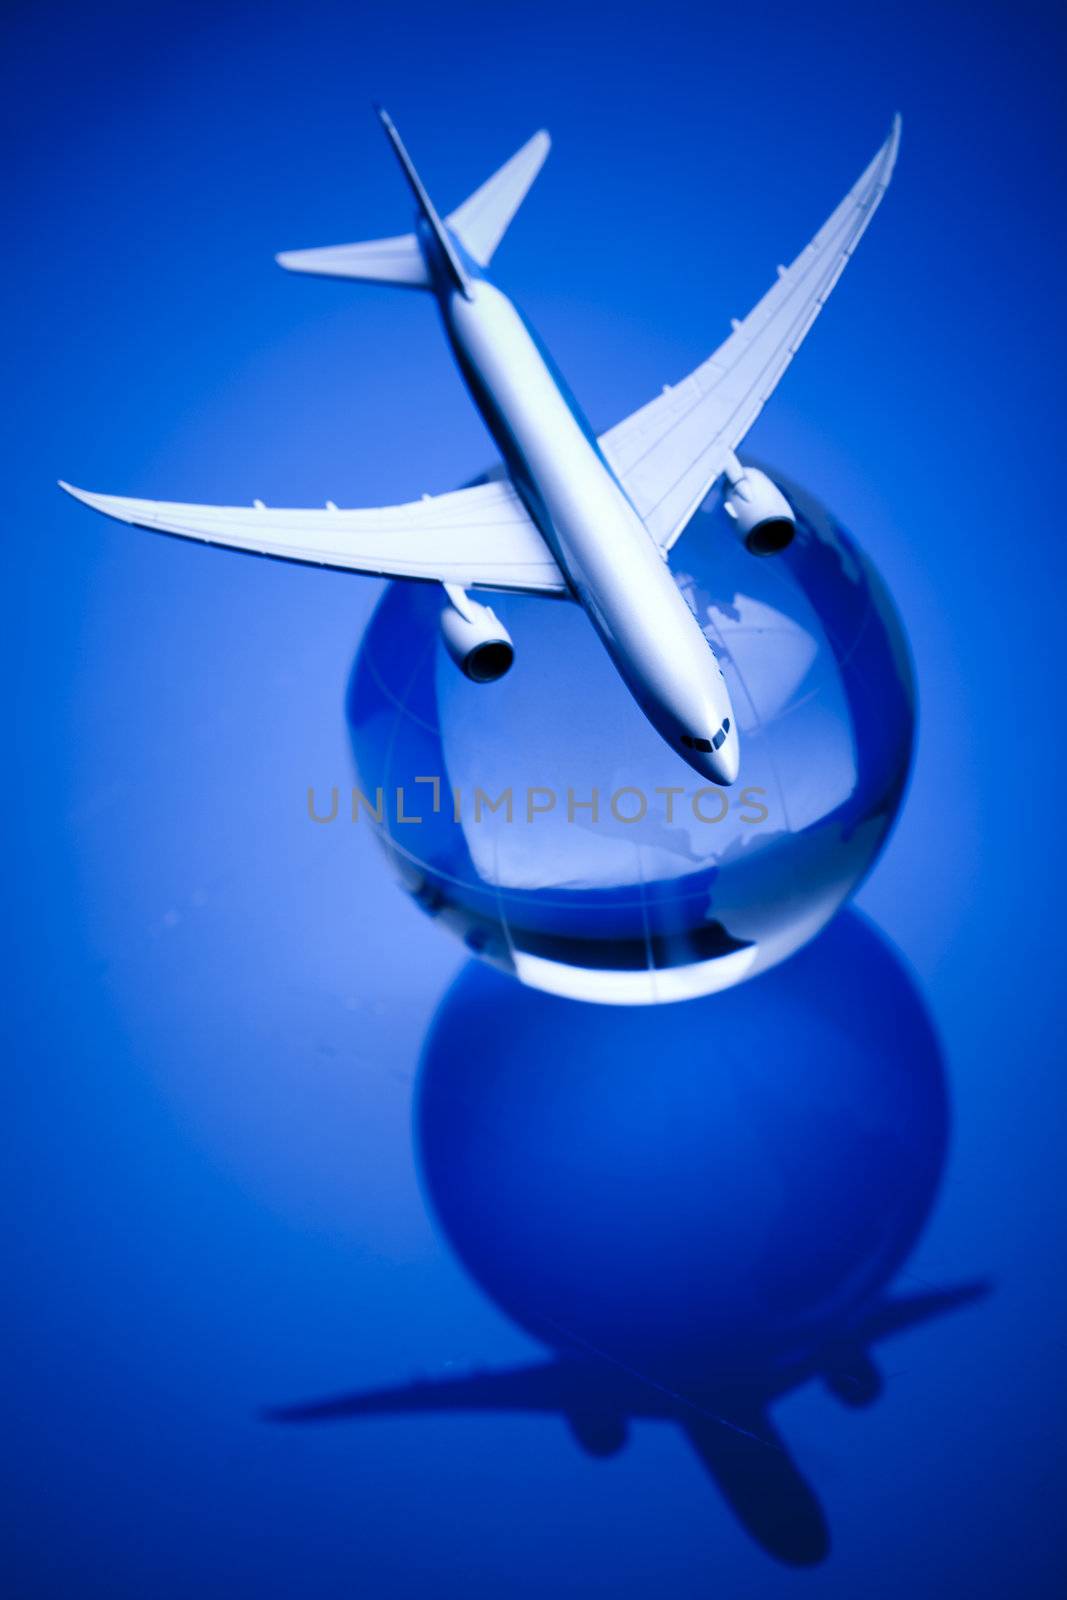 Airliner with earth in the blue background by JanPietruszka